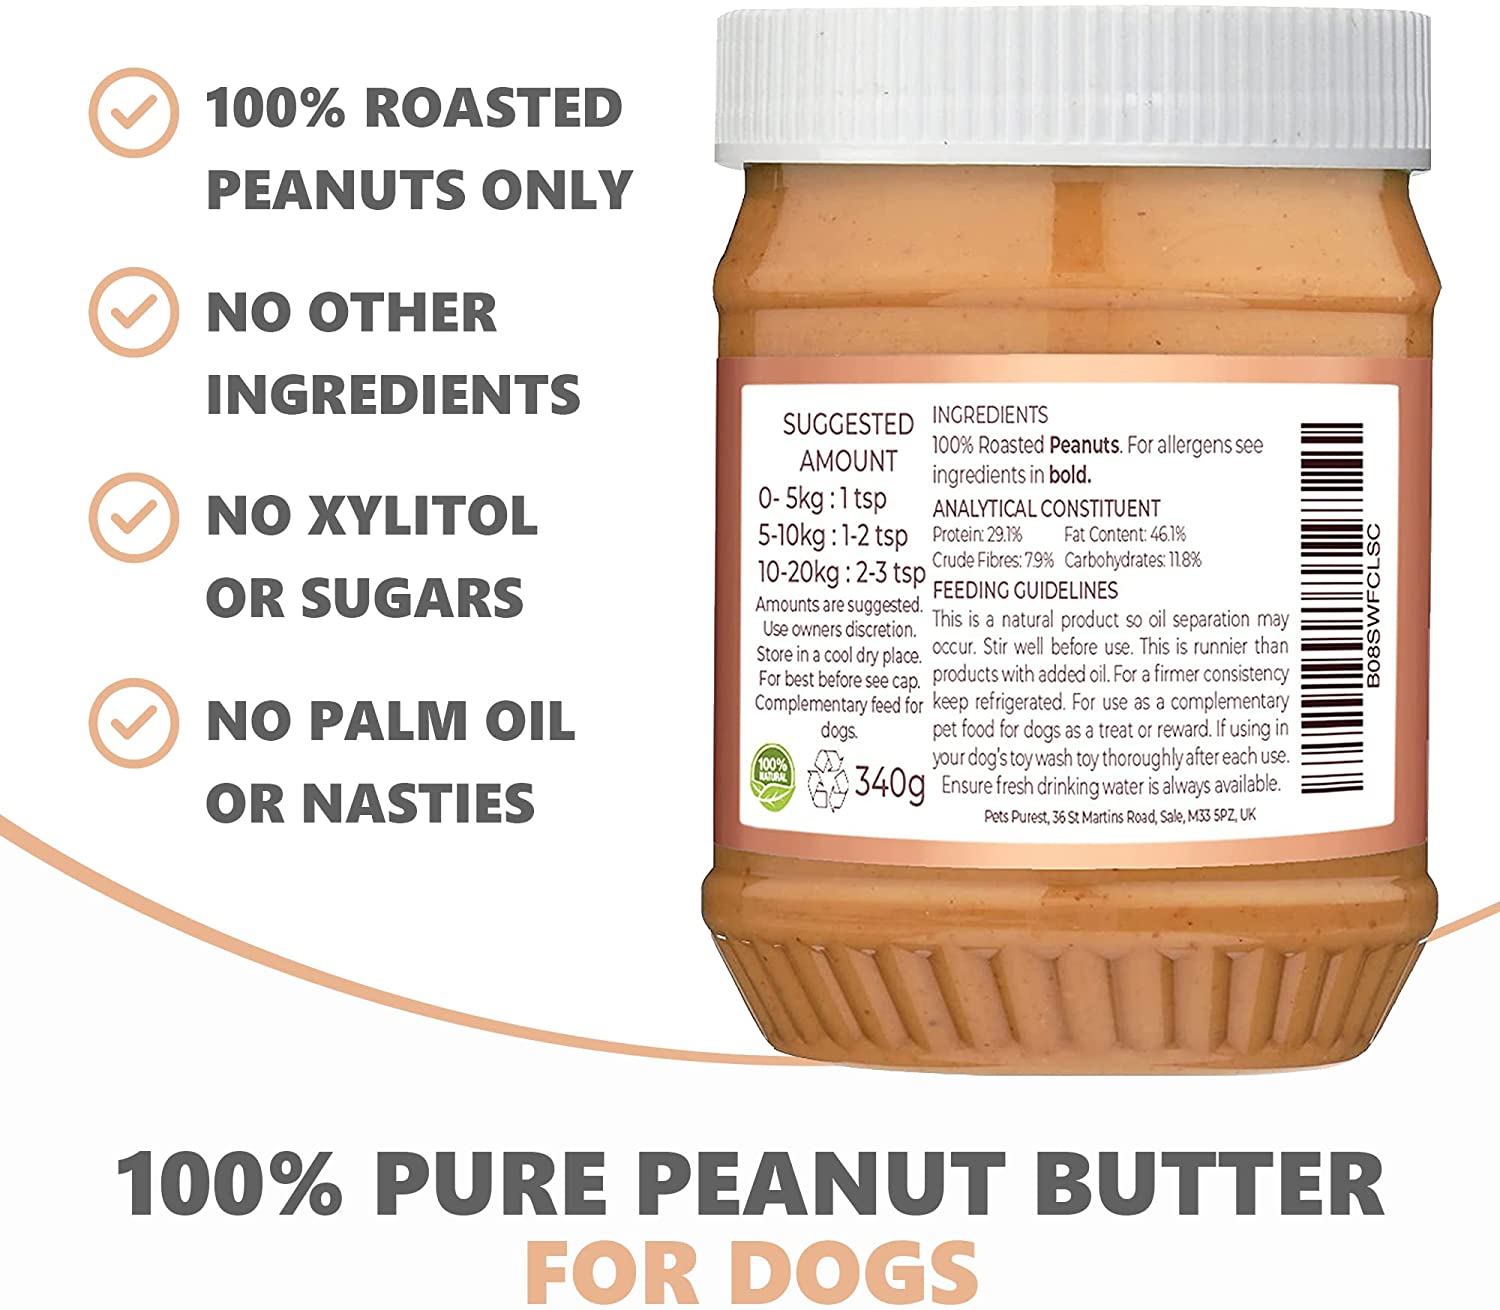 is palm oil in peanut butter bad for dogs